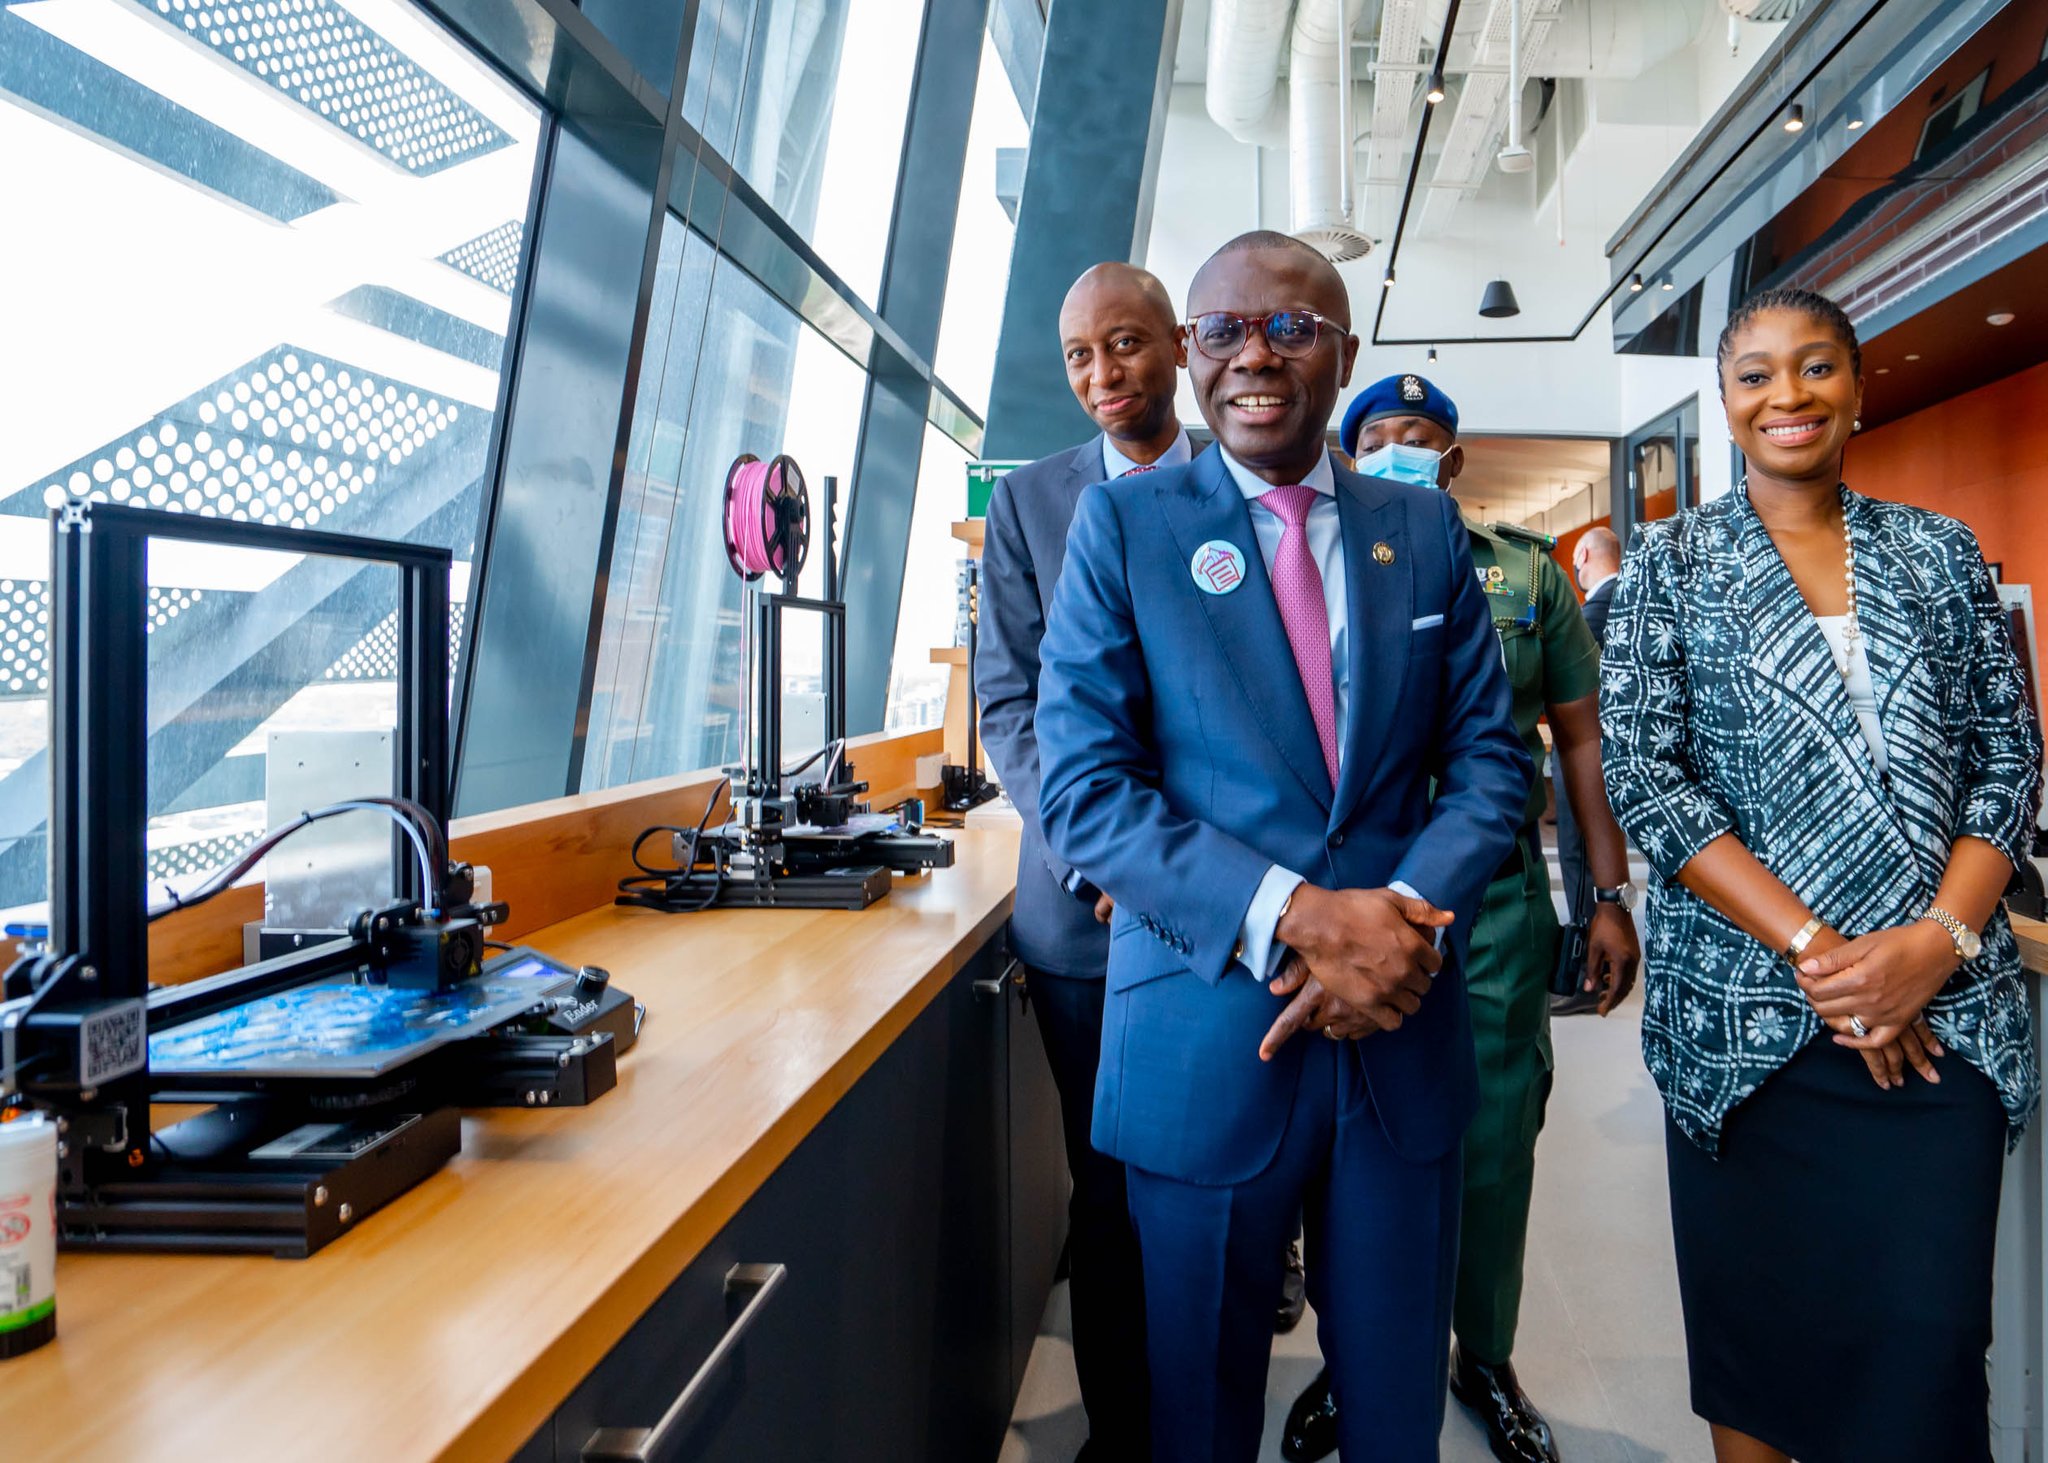 PHOTOS: Nigerians reacts as Sanwo-Olu attends the opening of Microsoft ADC West Africa at Kings Tower, Ikoyi Lagos